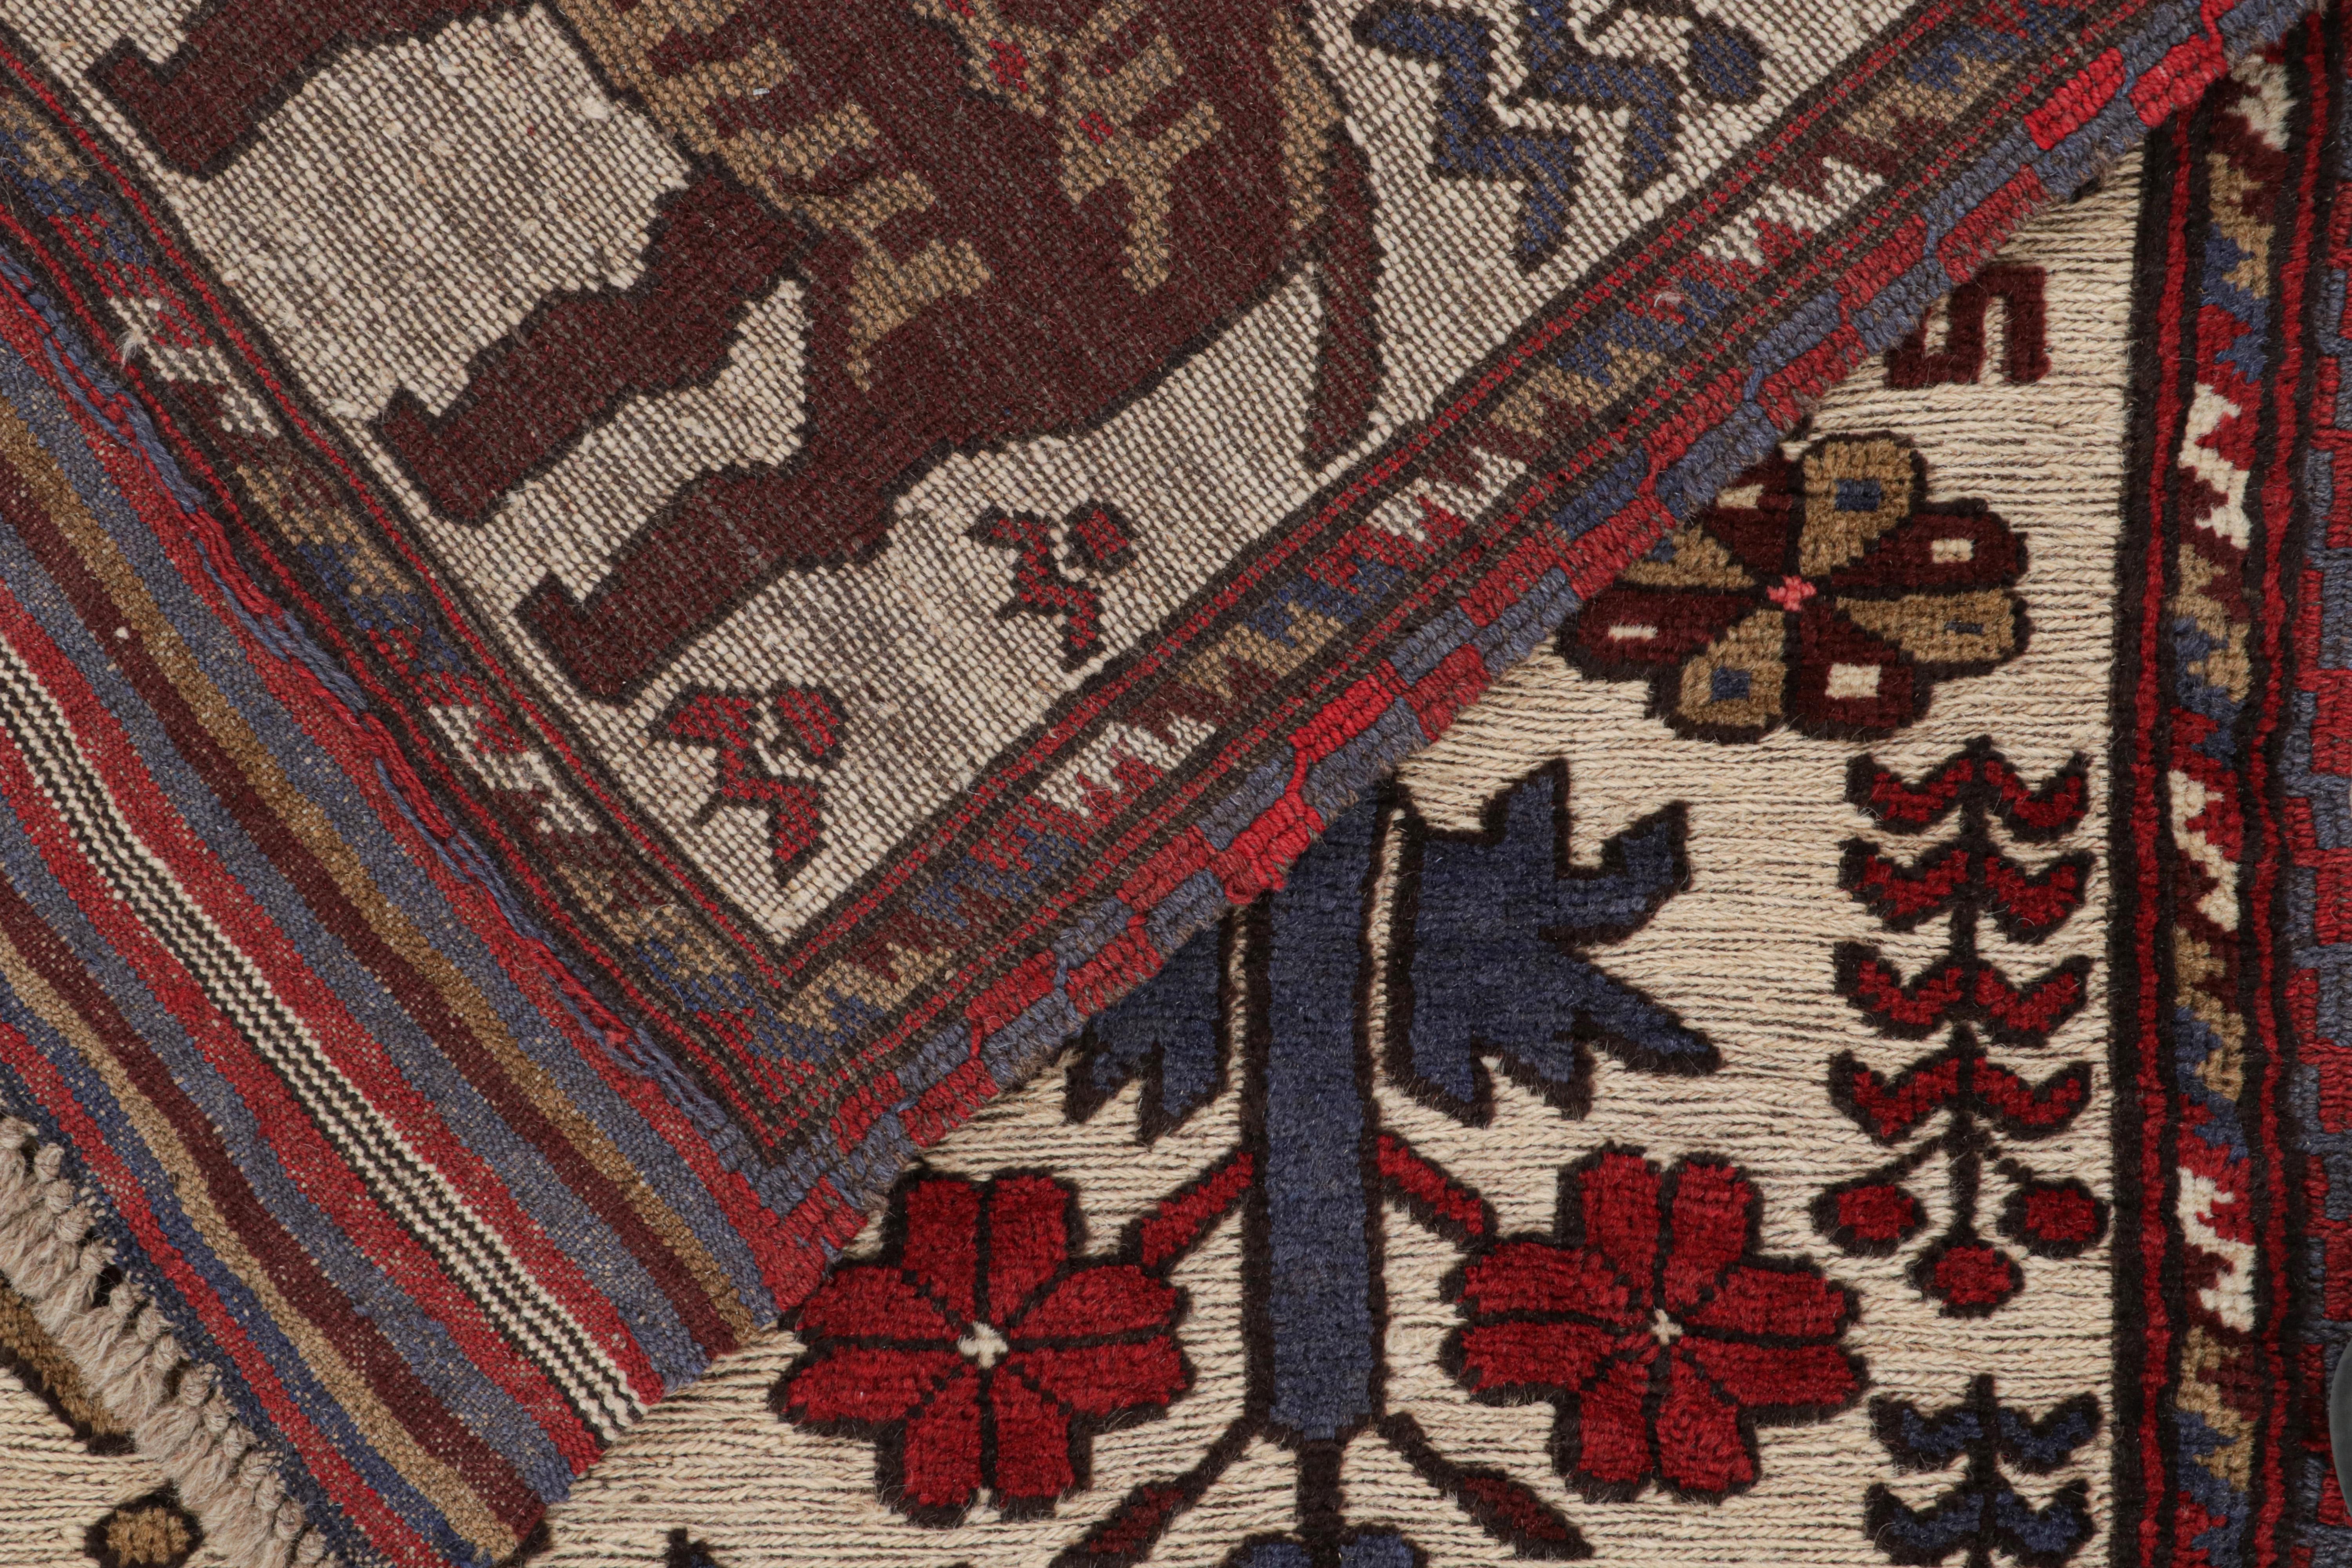 Contemporary Rug & Kilim’s Persian Barjasta style rug in Beige with Red & Blue Deer Pictorial For Sale